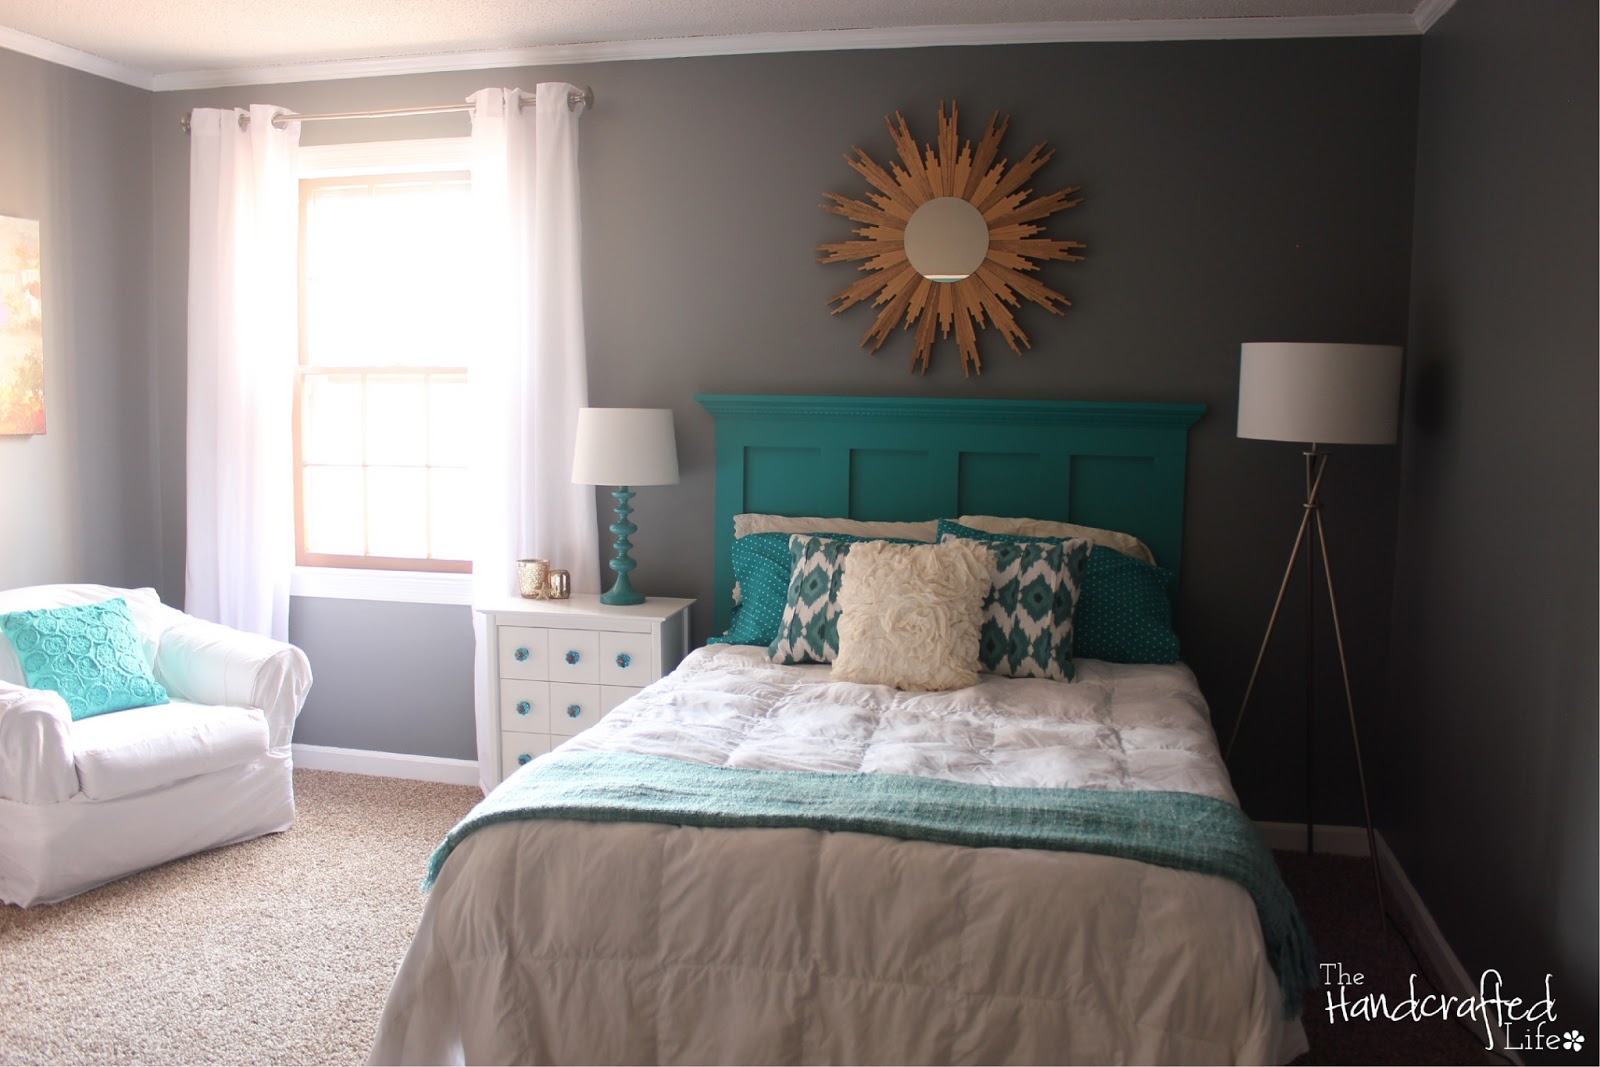  The Handcrafted Life Teal  White and Grey Guest Bedroom  